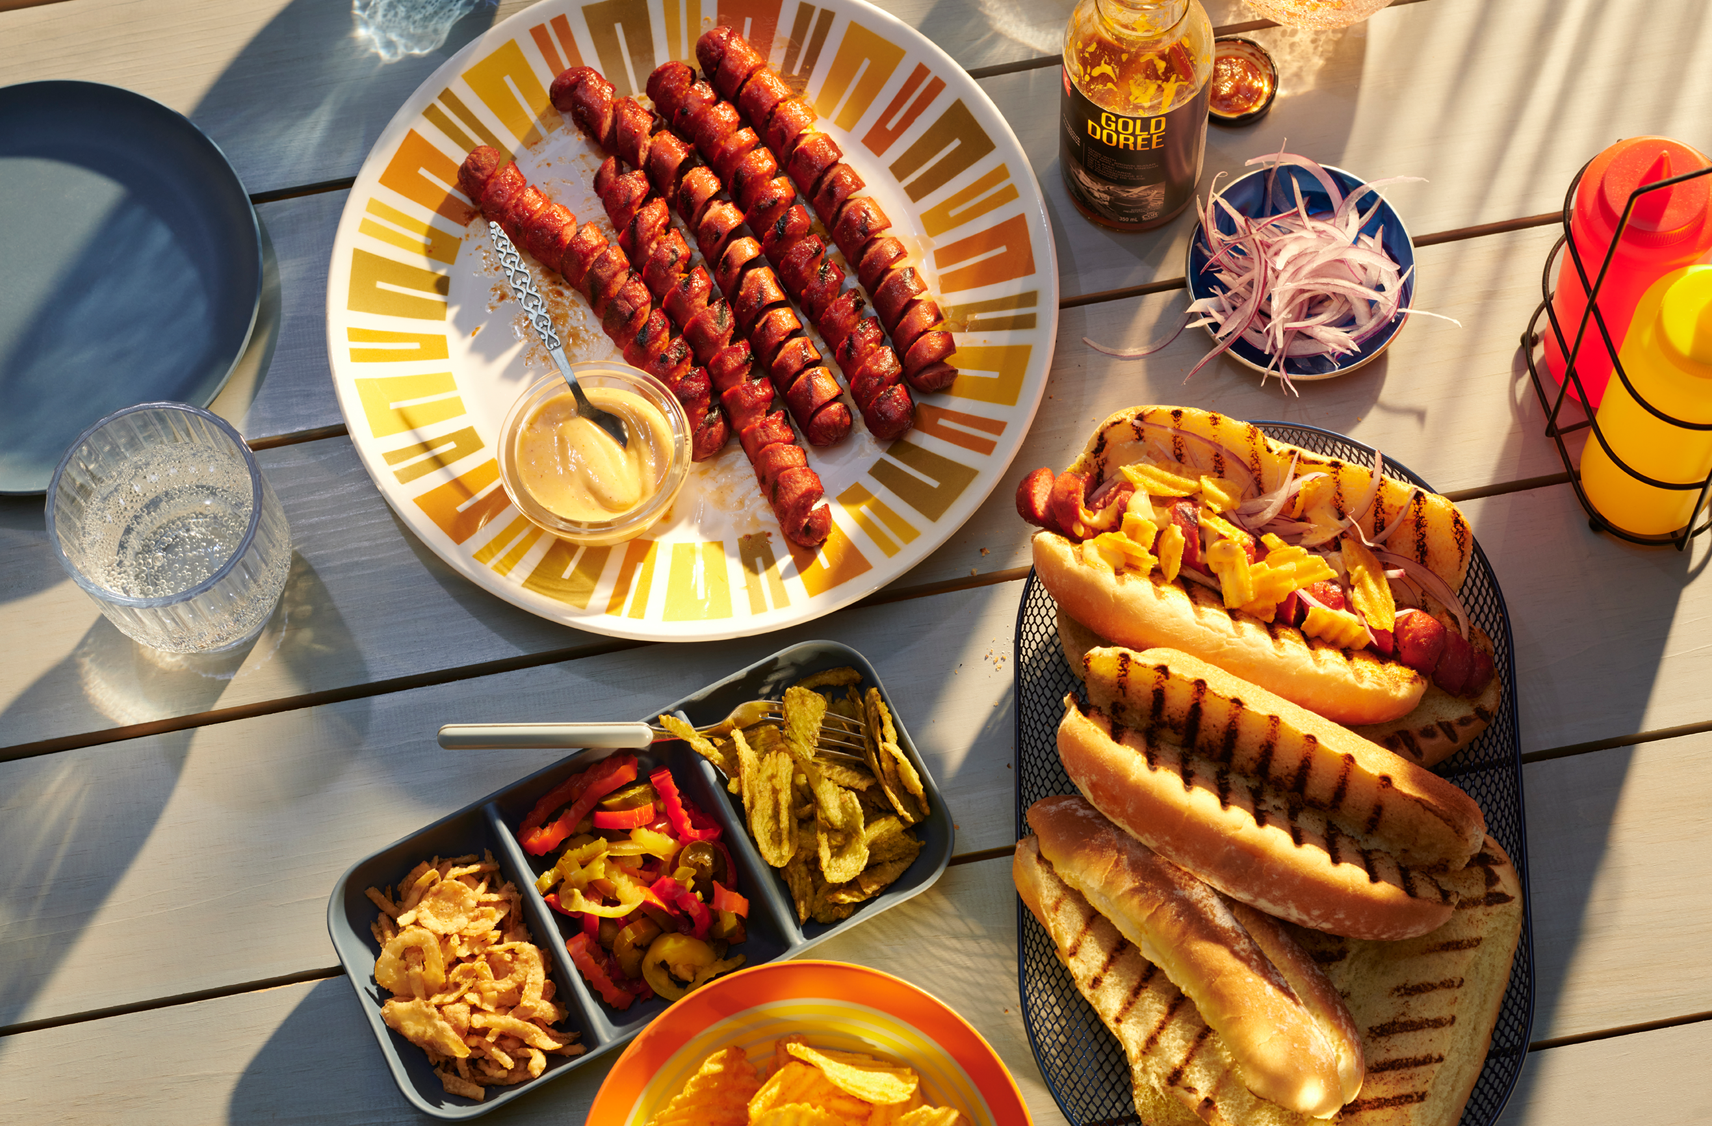 A picnic table with some summer faves including spiralized hot dogs on a dish and grille buns on another and a variety of toppings and condiments.